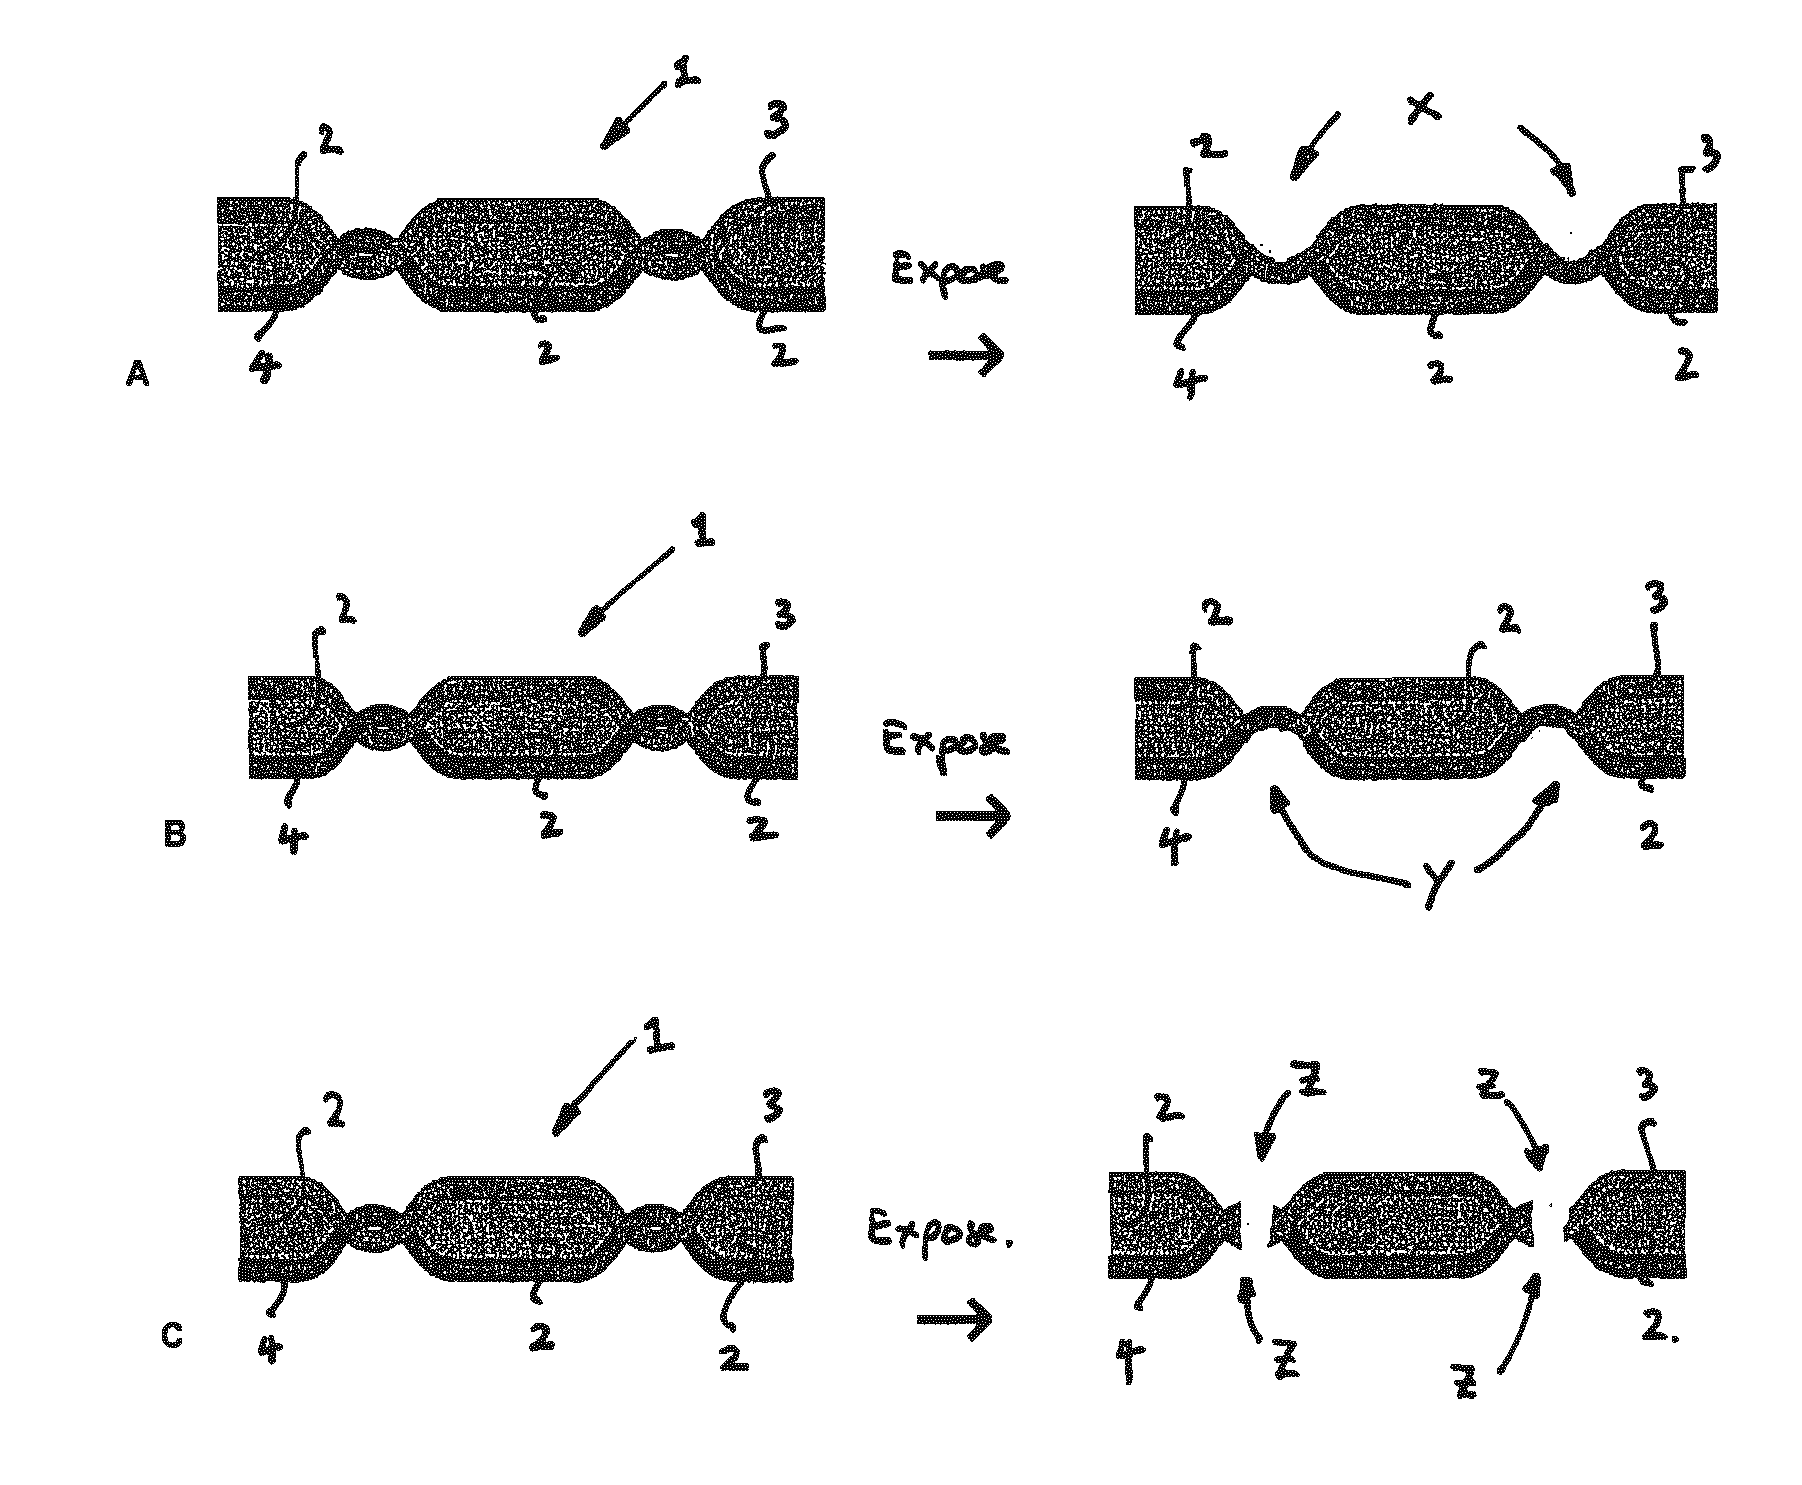 Article assembly disassembly system